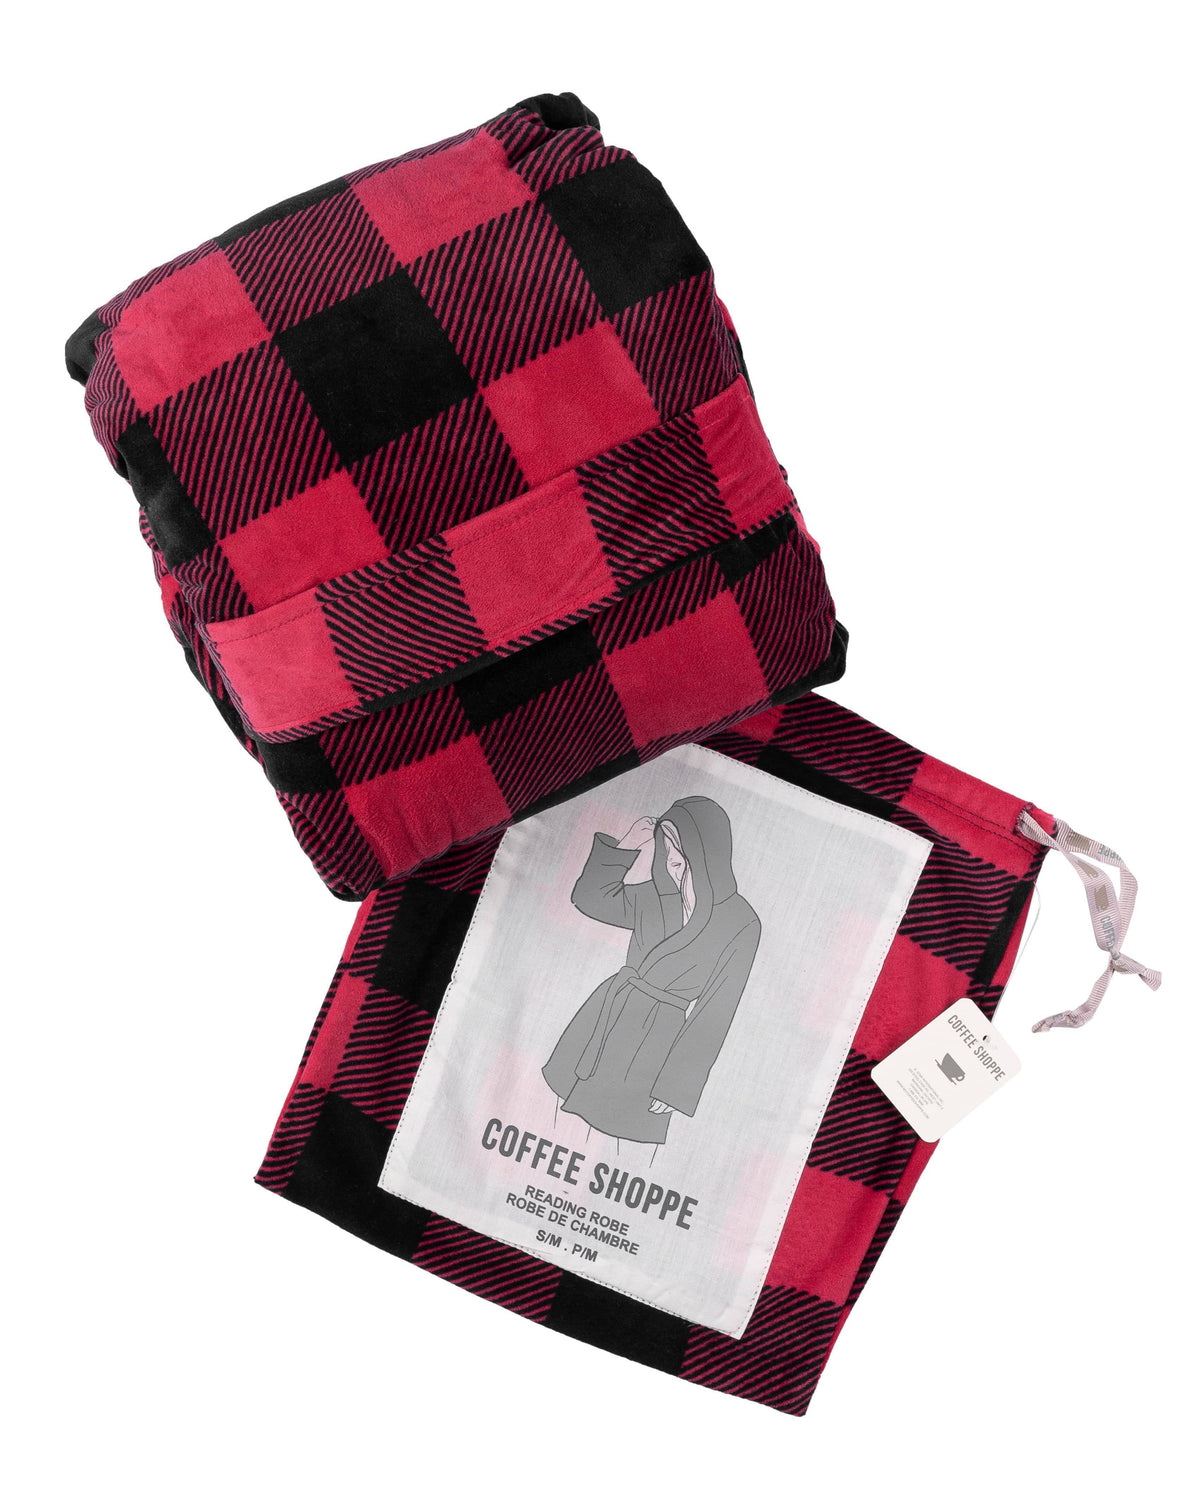 Stay-At-Home Lounge Robe - Deep Red Buffalo Plaid - LATTELOVE Co.